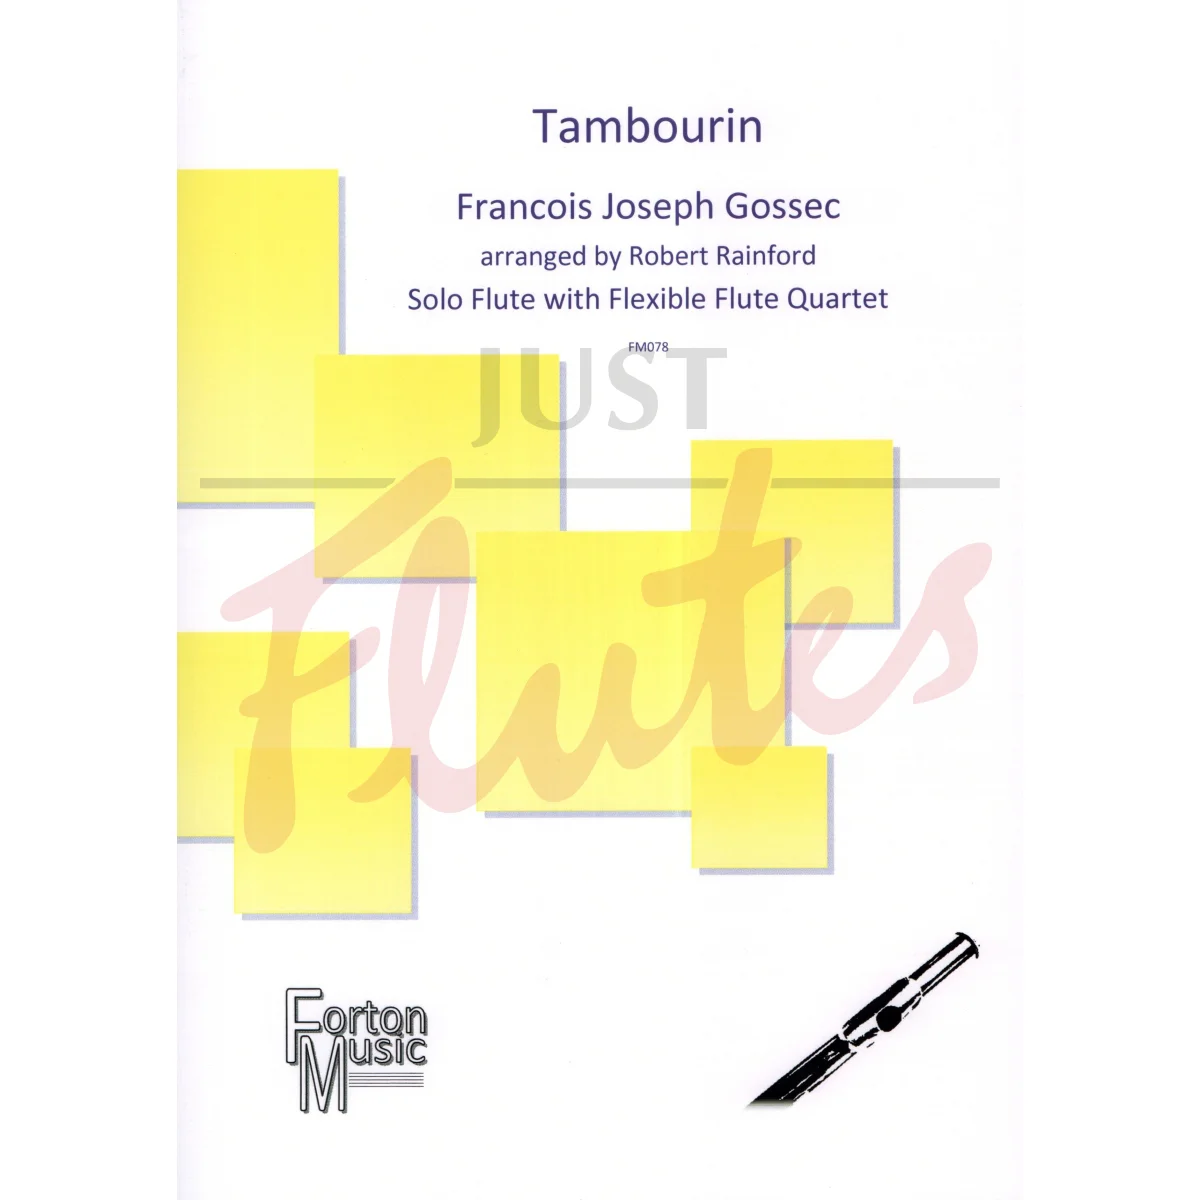 Tambourin for Solo Flute with Flexible Flute Quartet